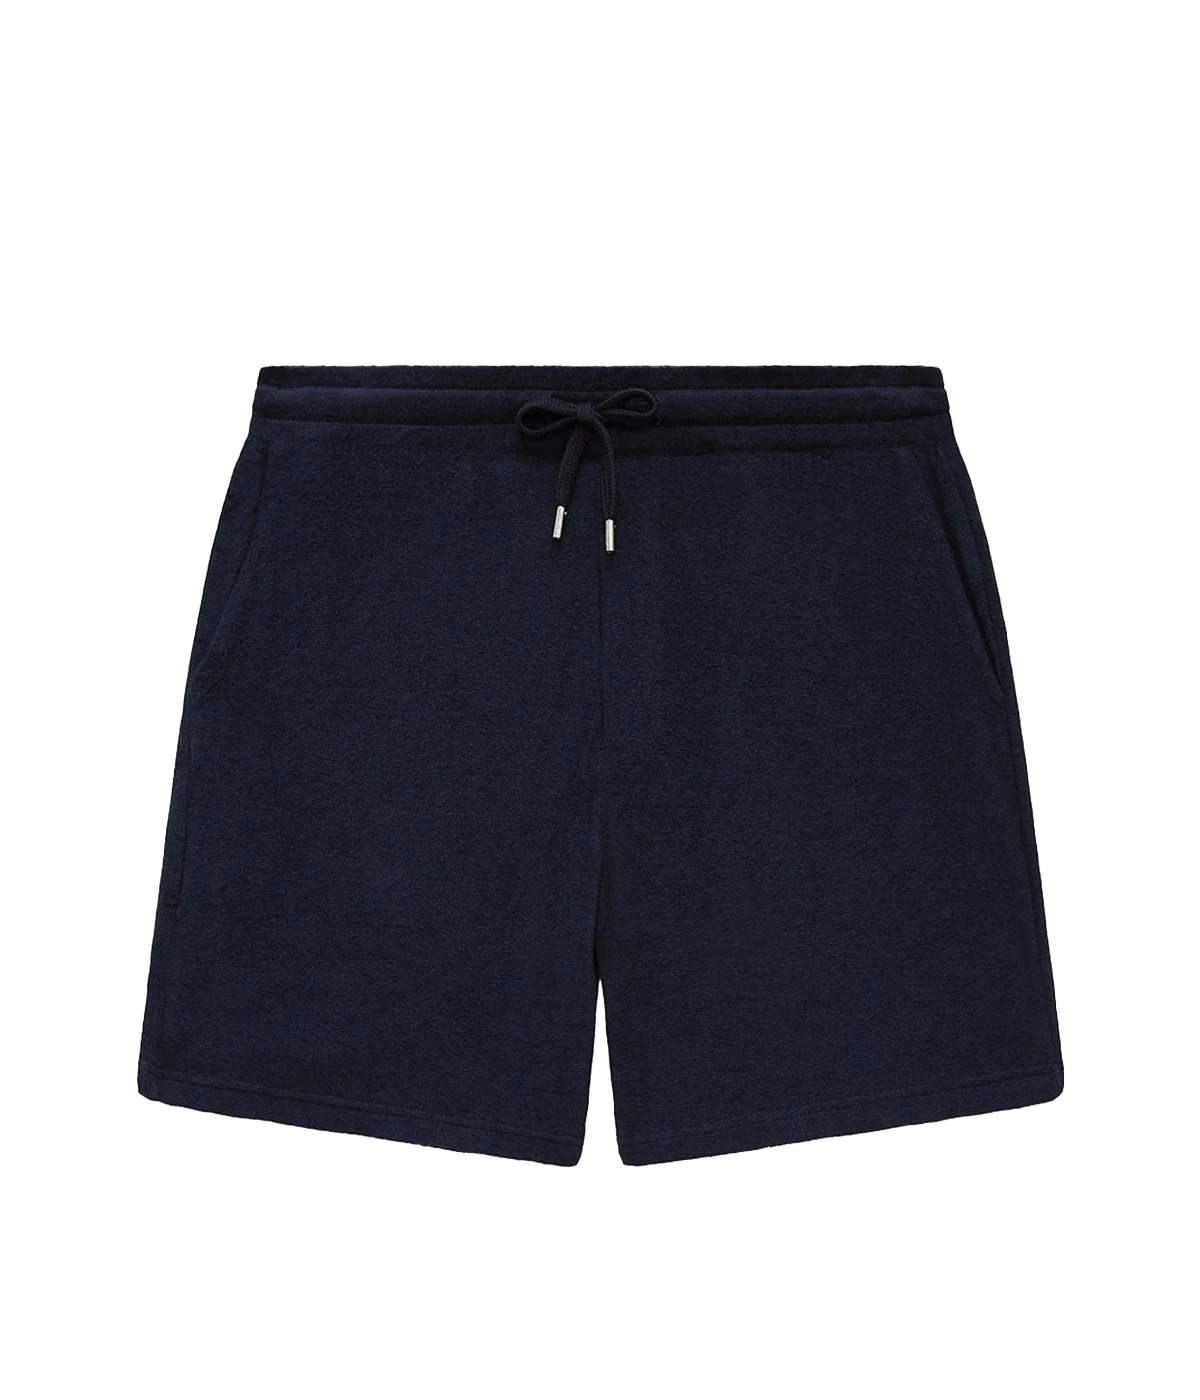 Augusto Terry Shorts in Navy Blue